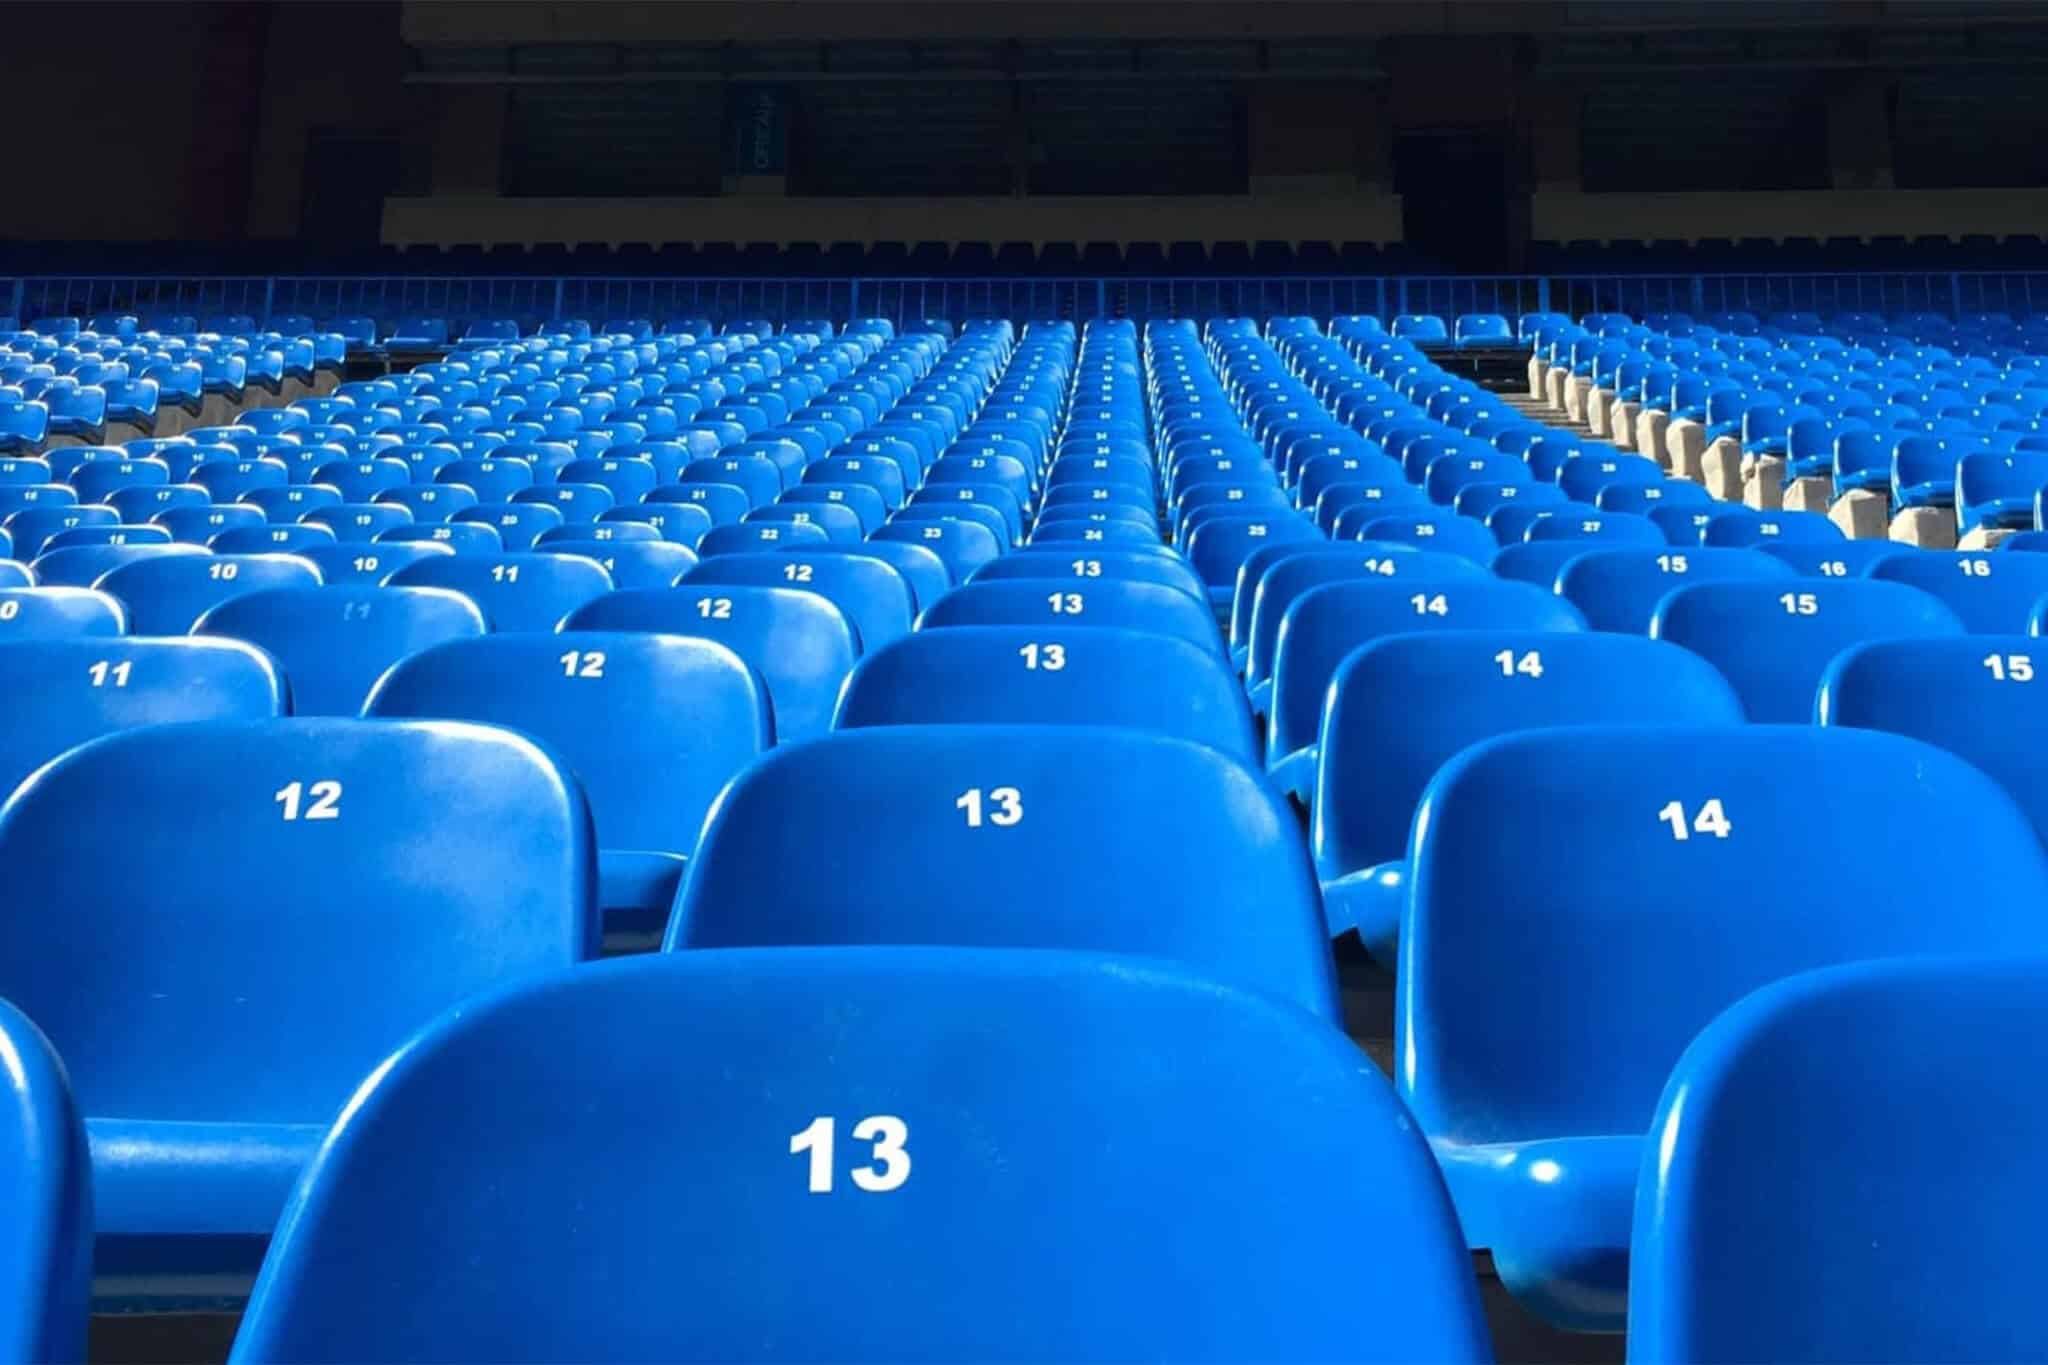 Rows of seats in a stadium